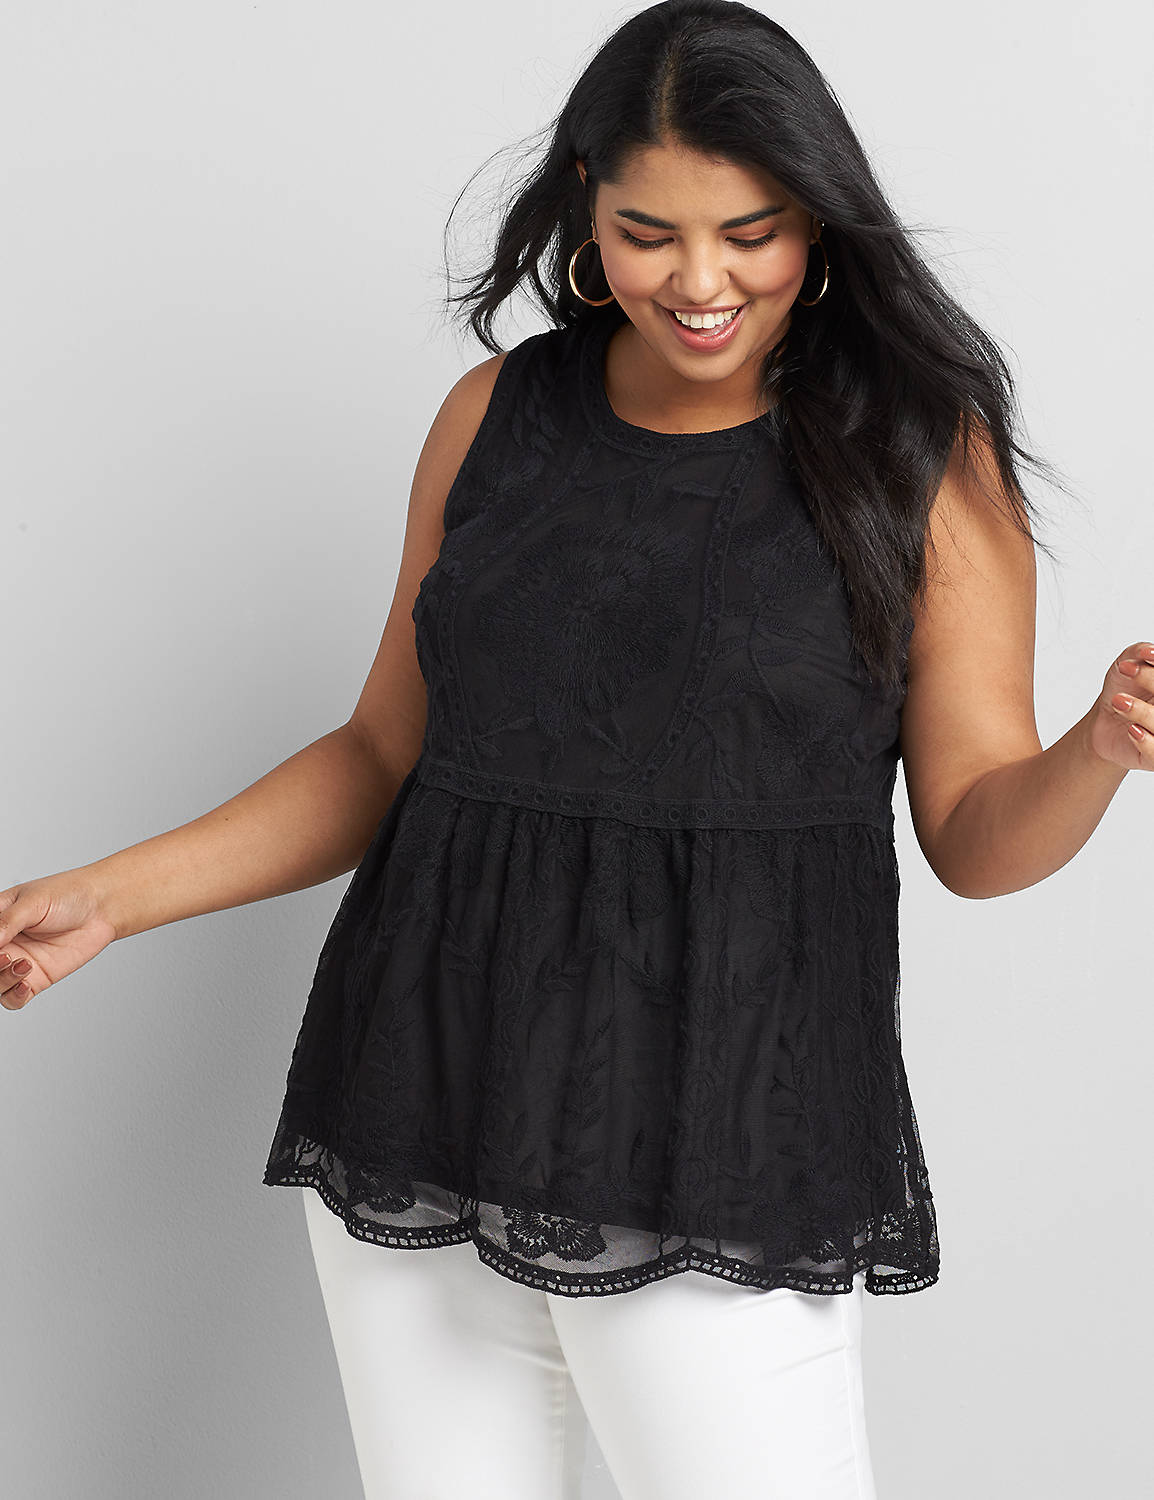 Sleeveless Crew Neck Baby Doll Embroidered Mesh 1118904:Ascena Black:22 Product Image 1